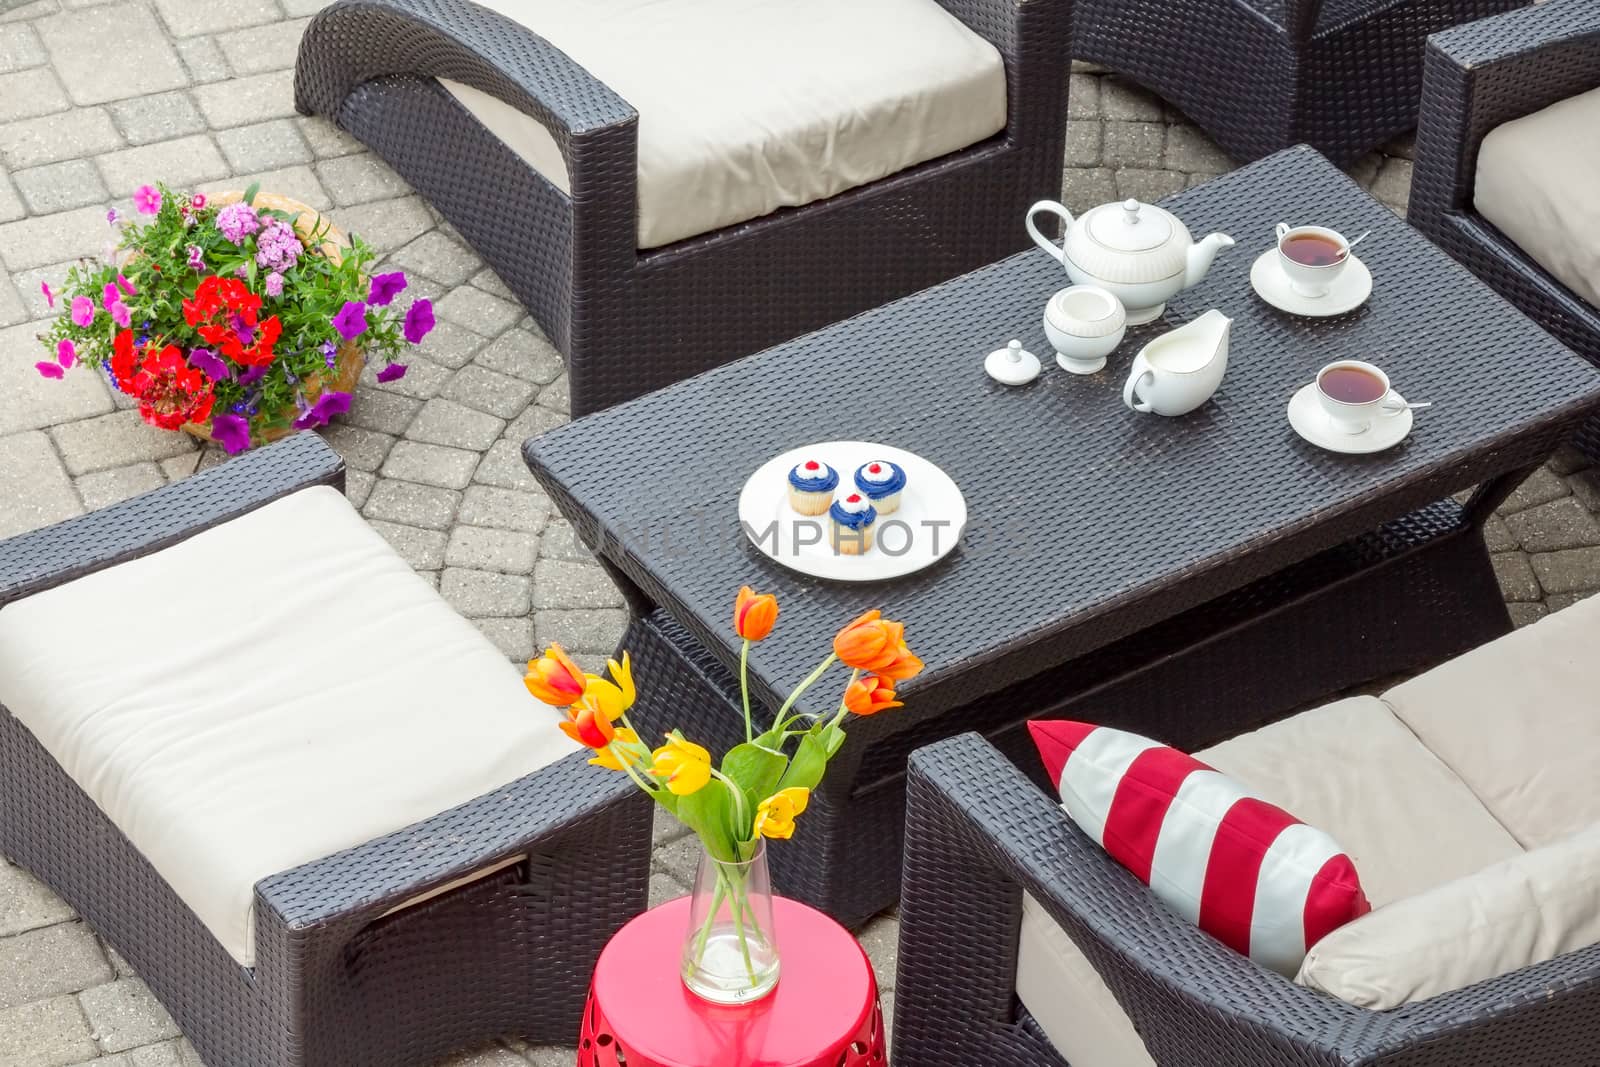 4th July tea served on an outdoor patio by coskun